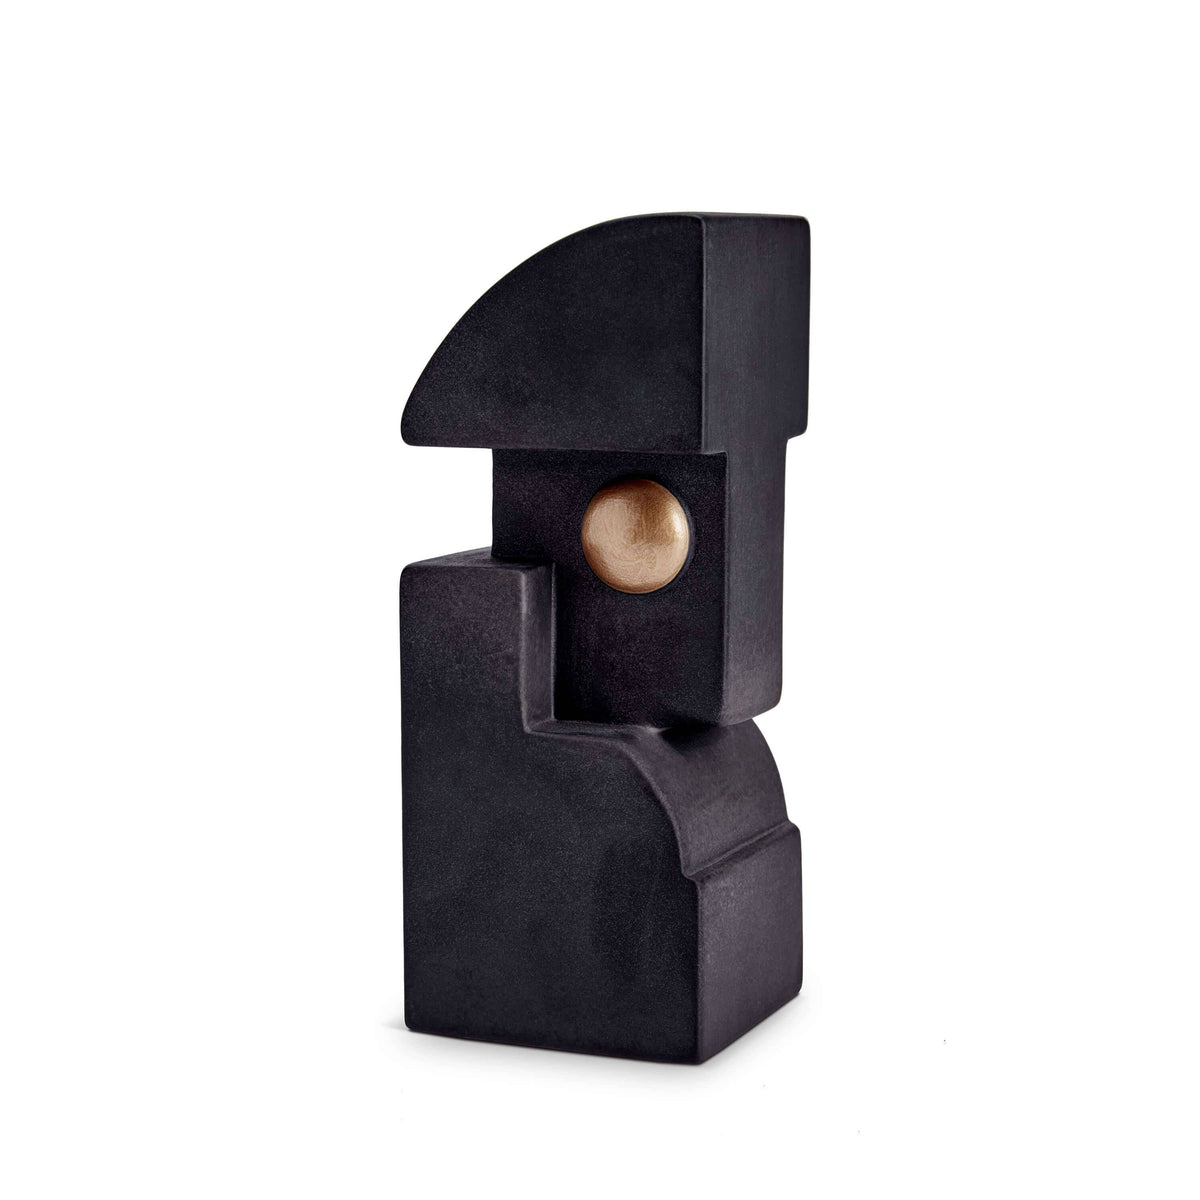 Cubisme Bookend - Number One